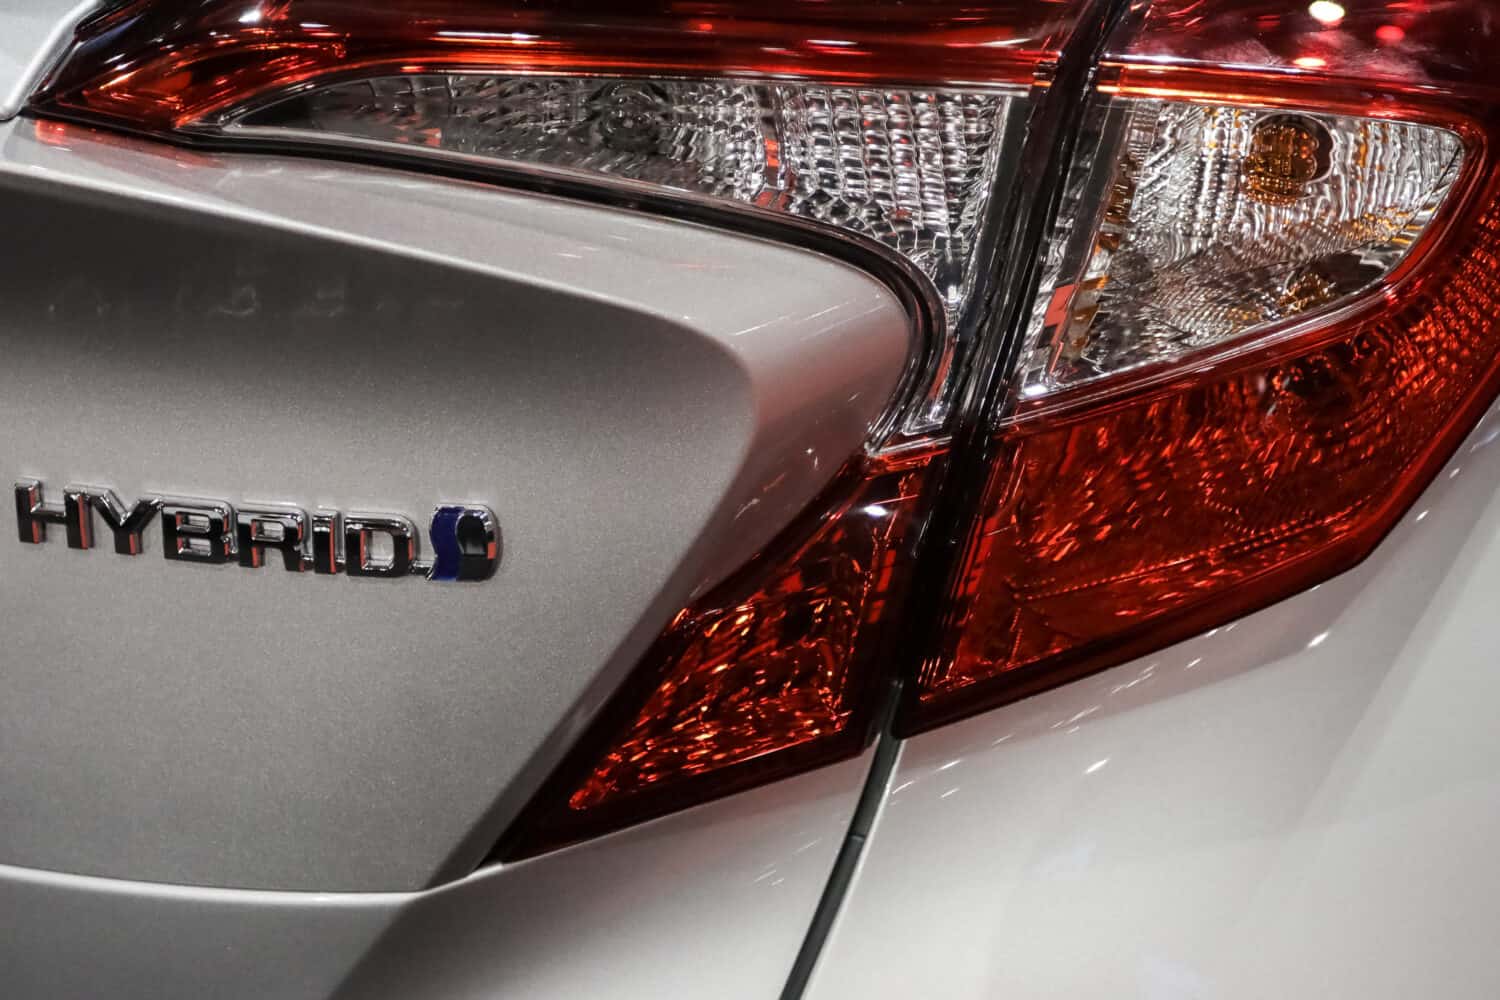 Hybrid logo detail of a car exhibited during a motor show.